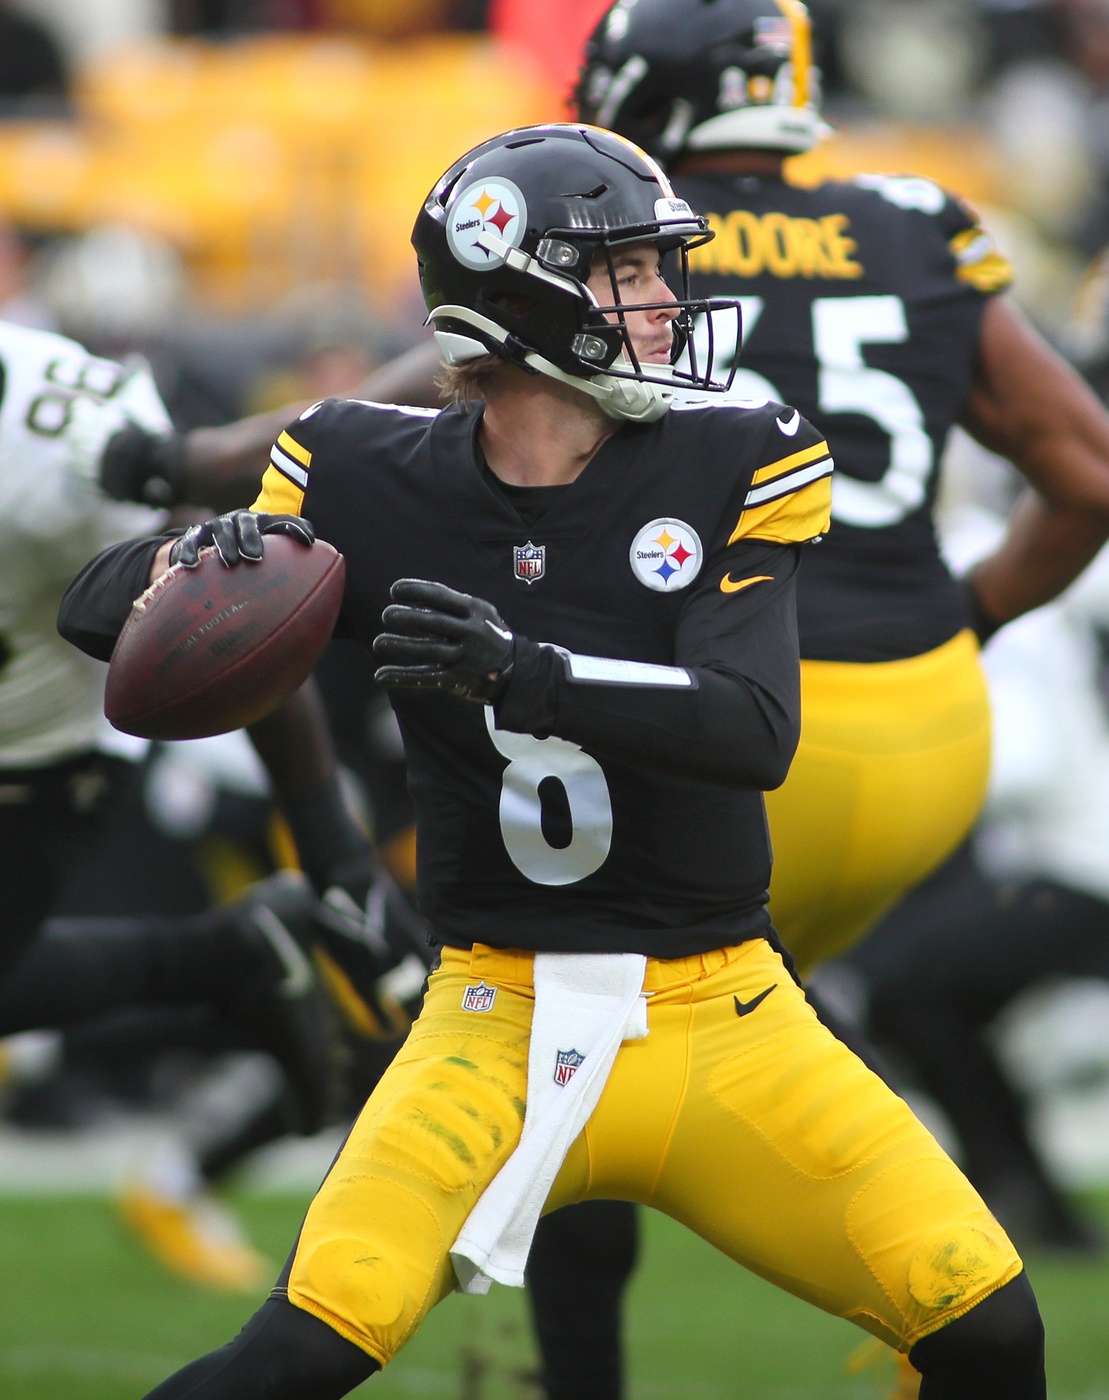 Ravens vs Steelers live stream: How to watch NFL week 13, odds and